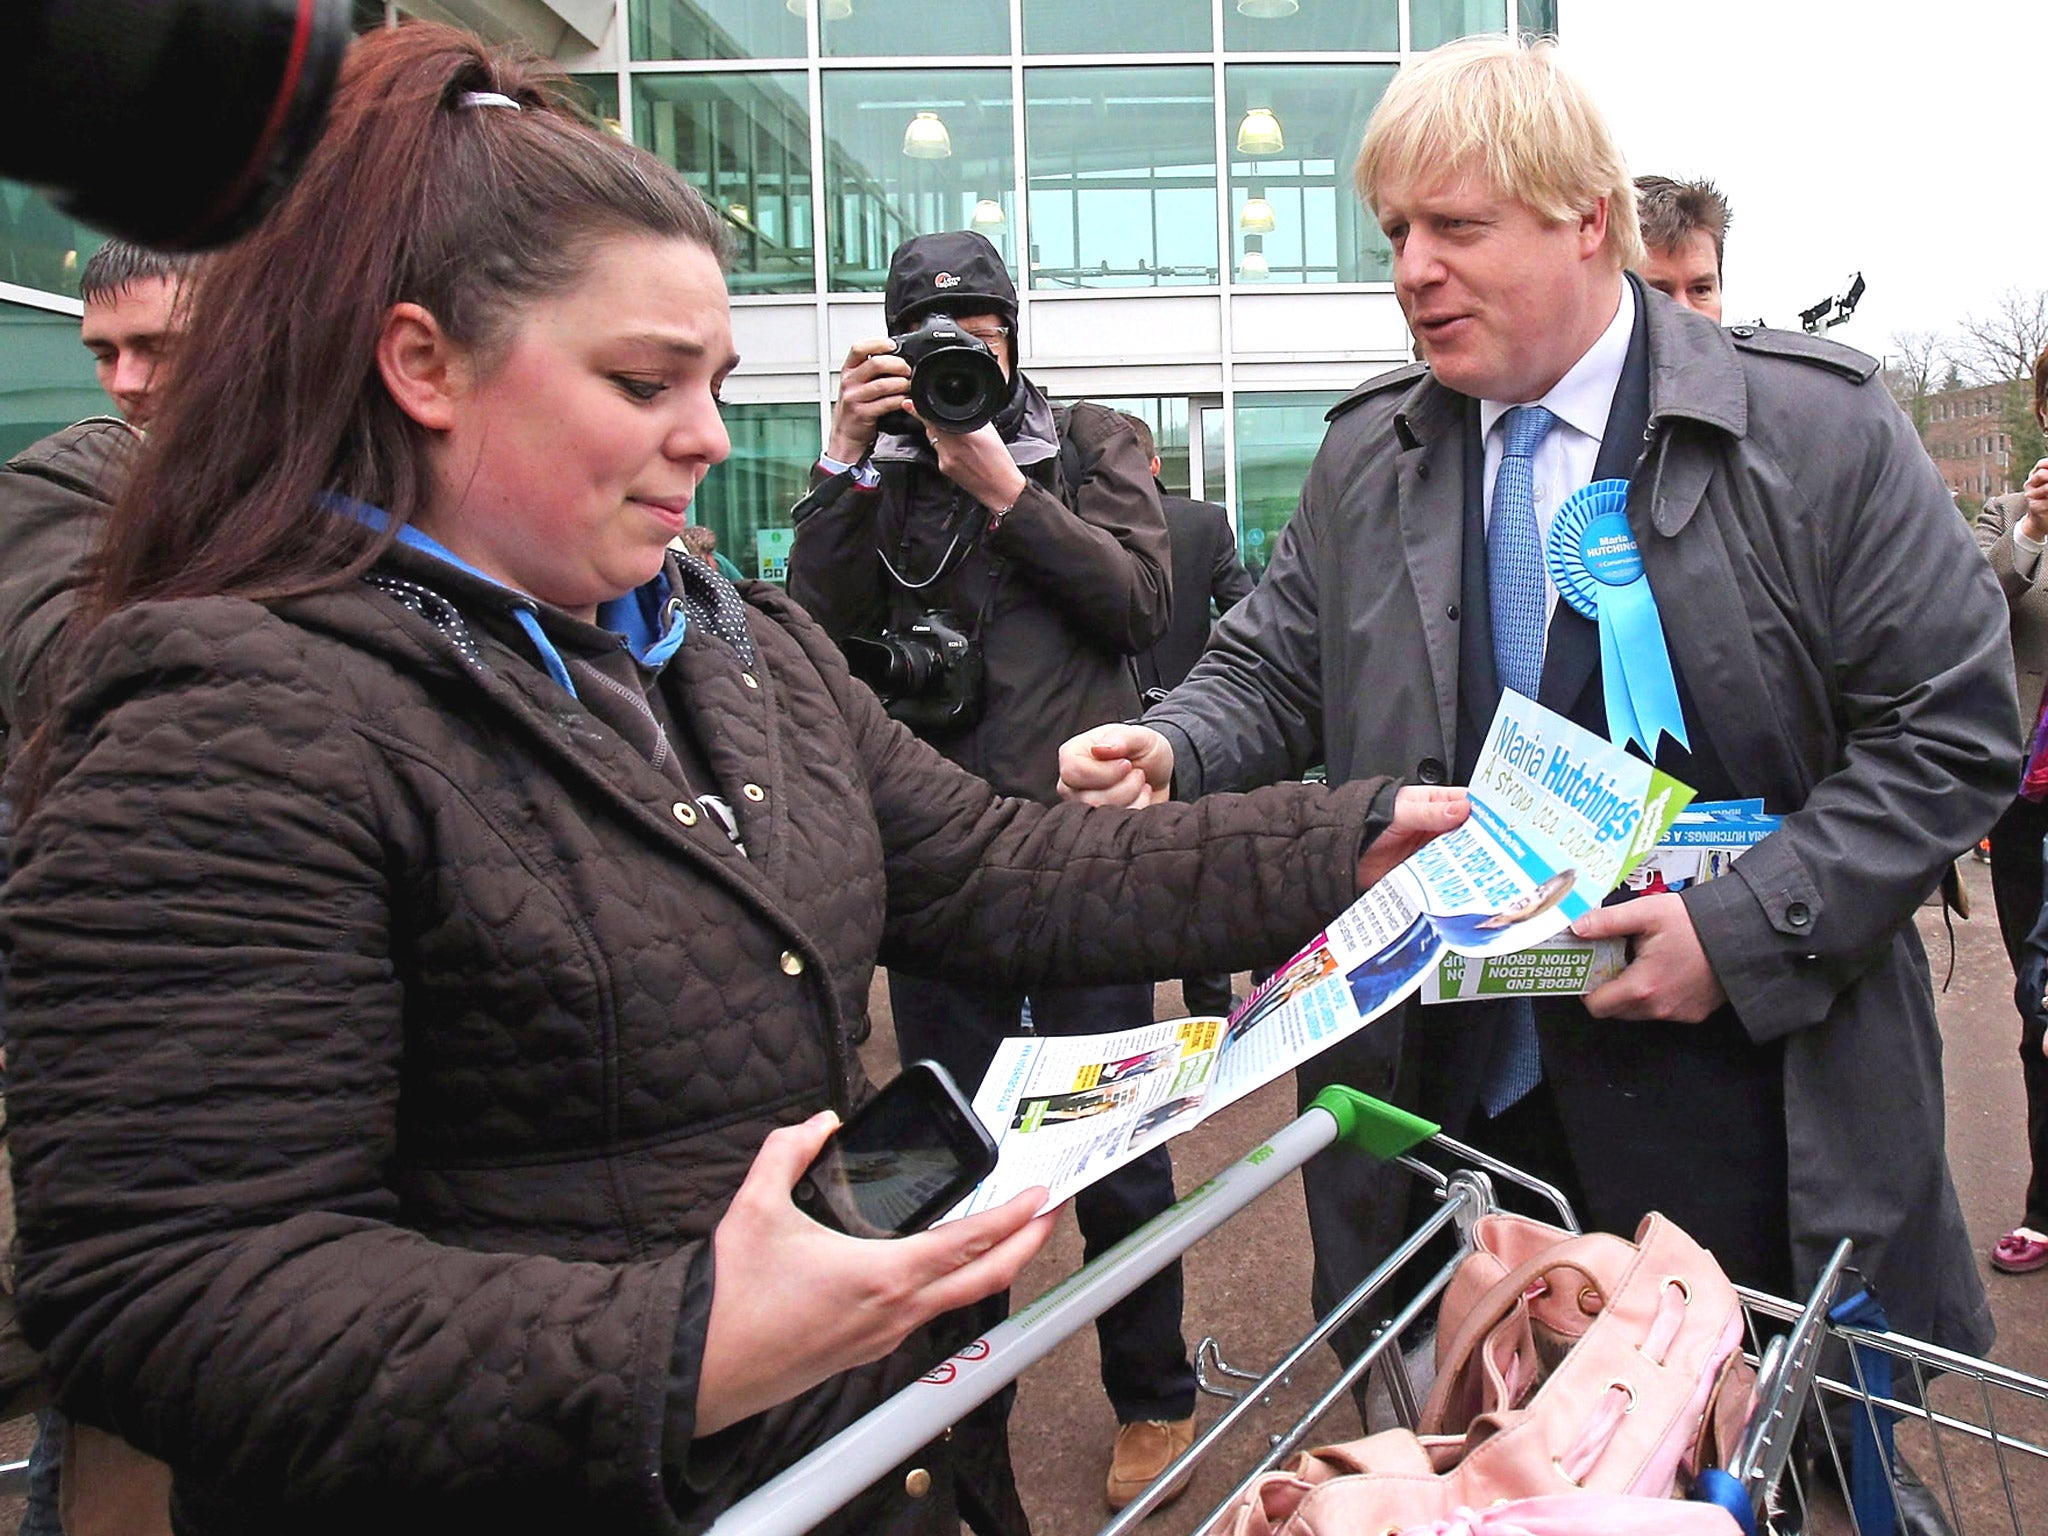 Boris Johnson speaks to a shopper in Eastleigh in support of Conservative candidate Maria Hutchings